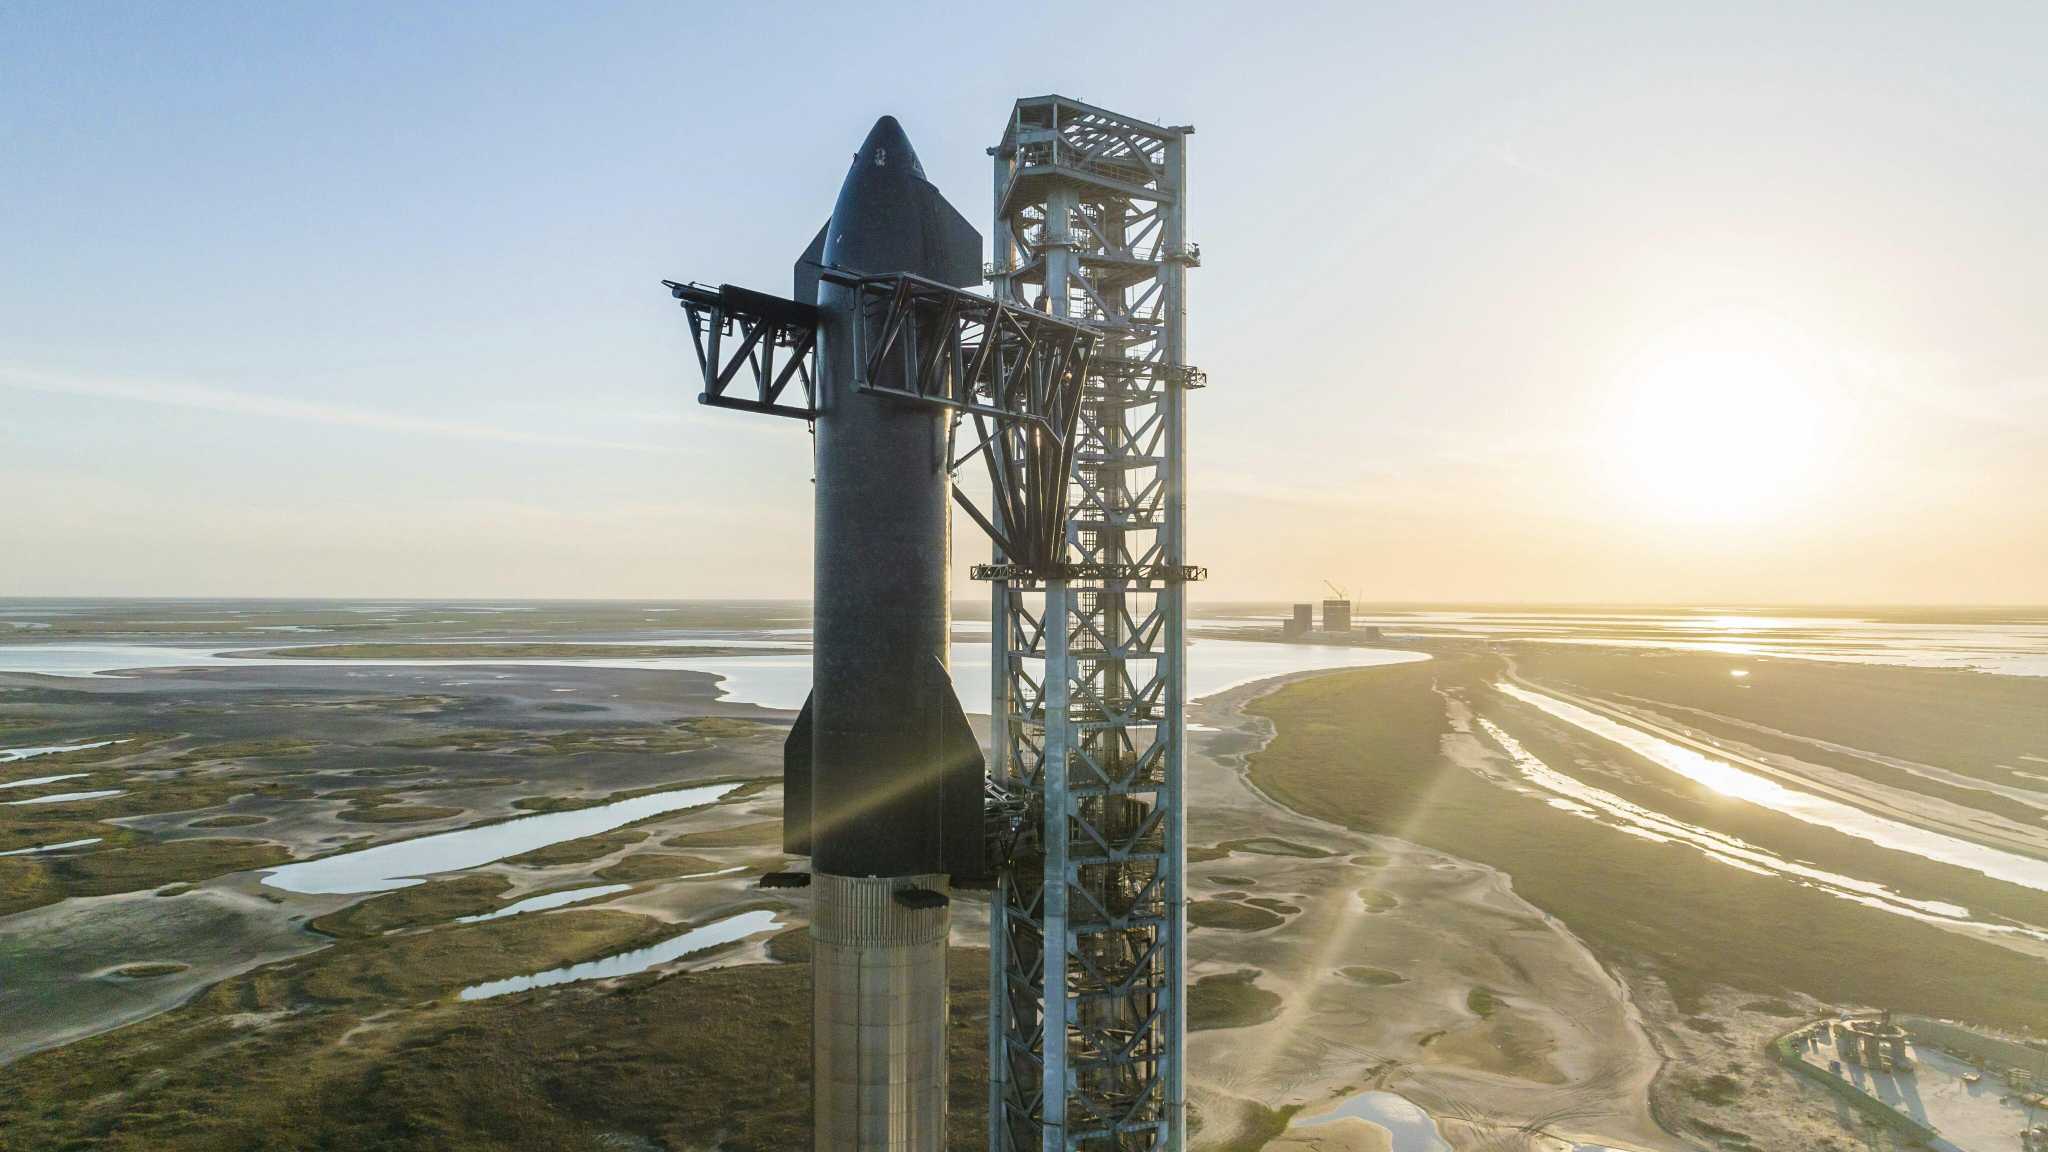 SpaceX, trying to get Starship into orbit, raising another 750M